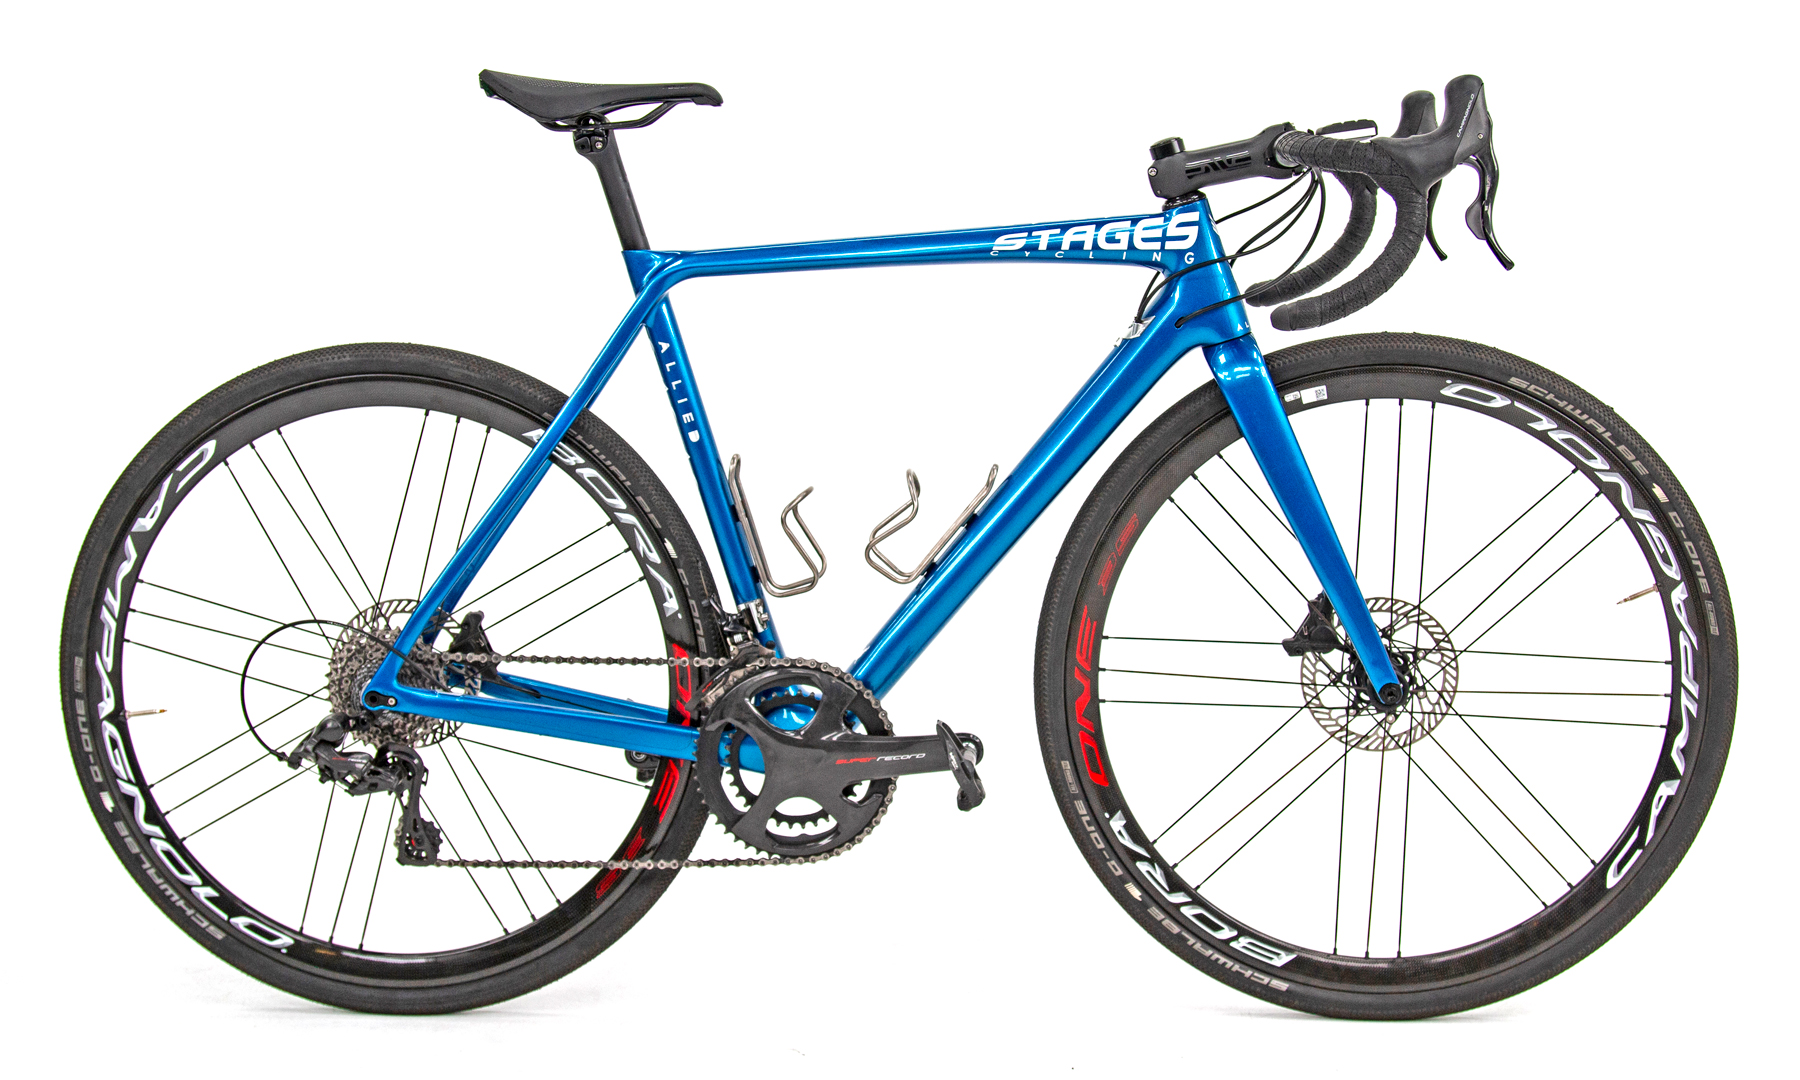 Stages adds 12-speed road compatibility w/ Campy Record, Super 